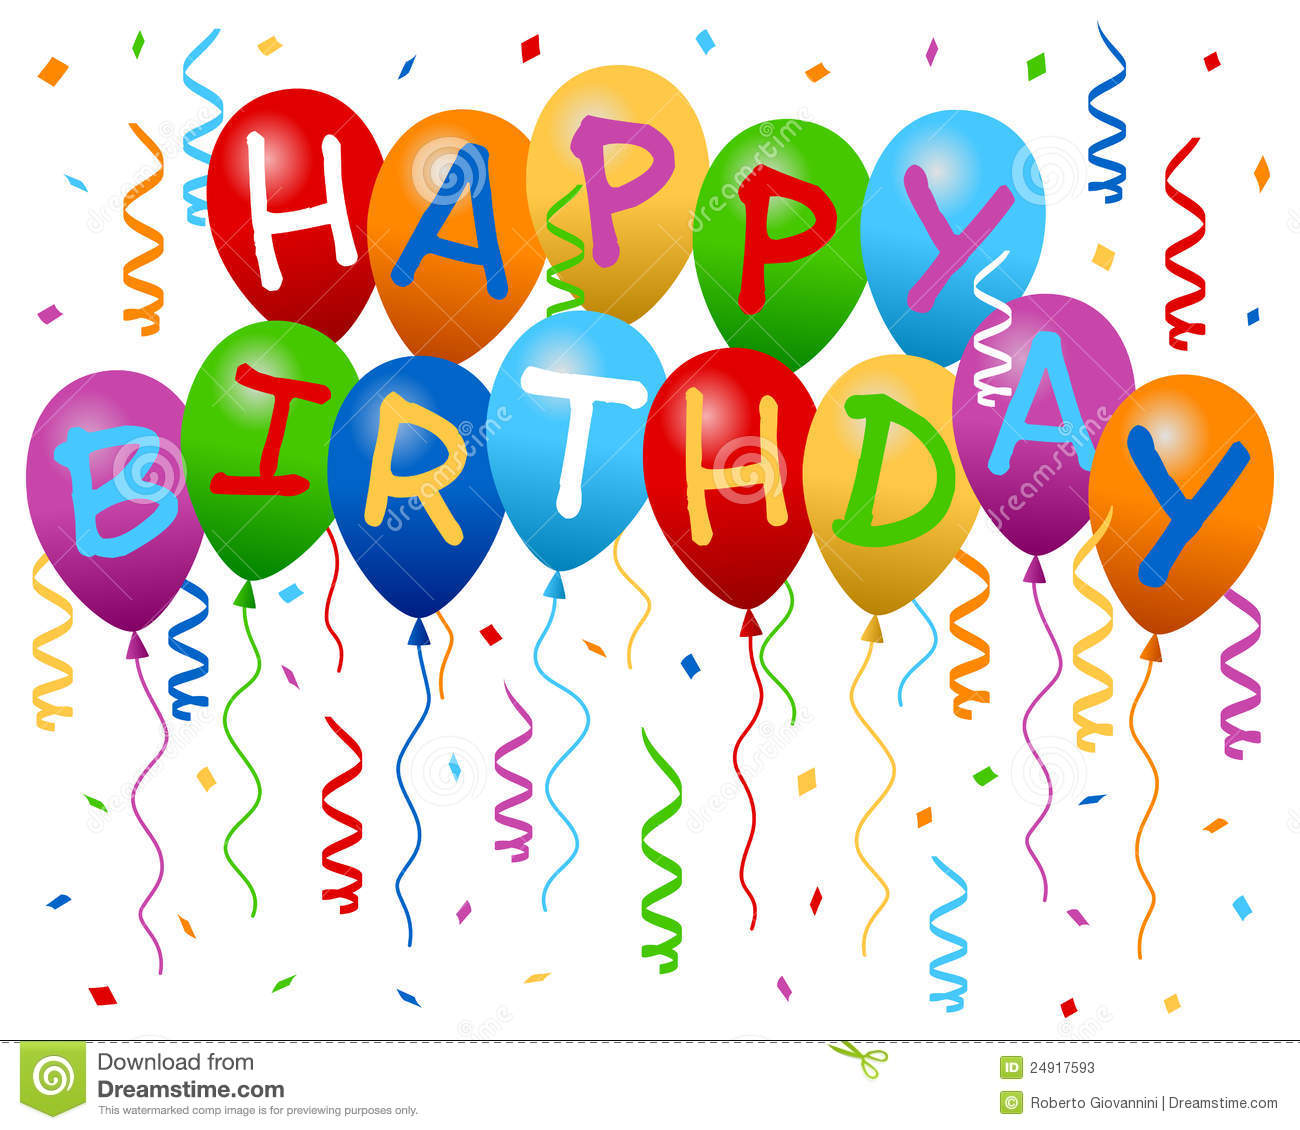 Free Clipart Images Birthday Balloons.